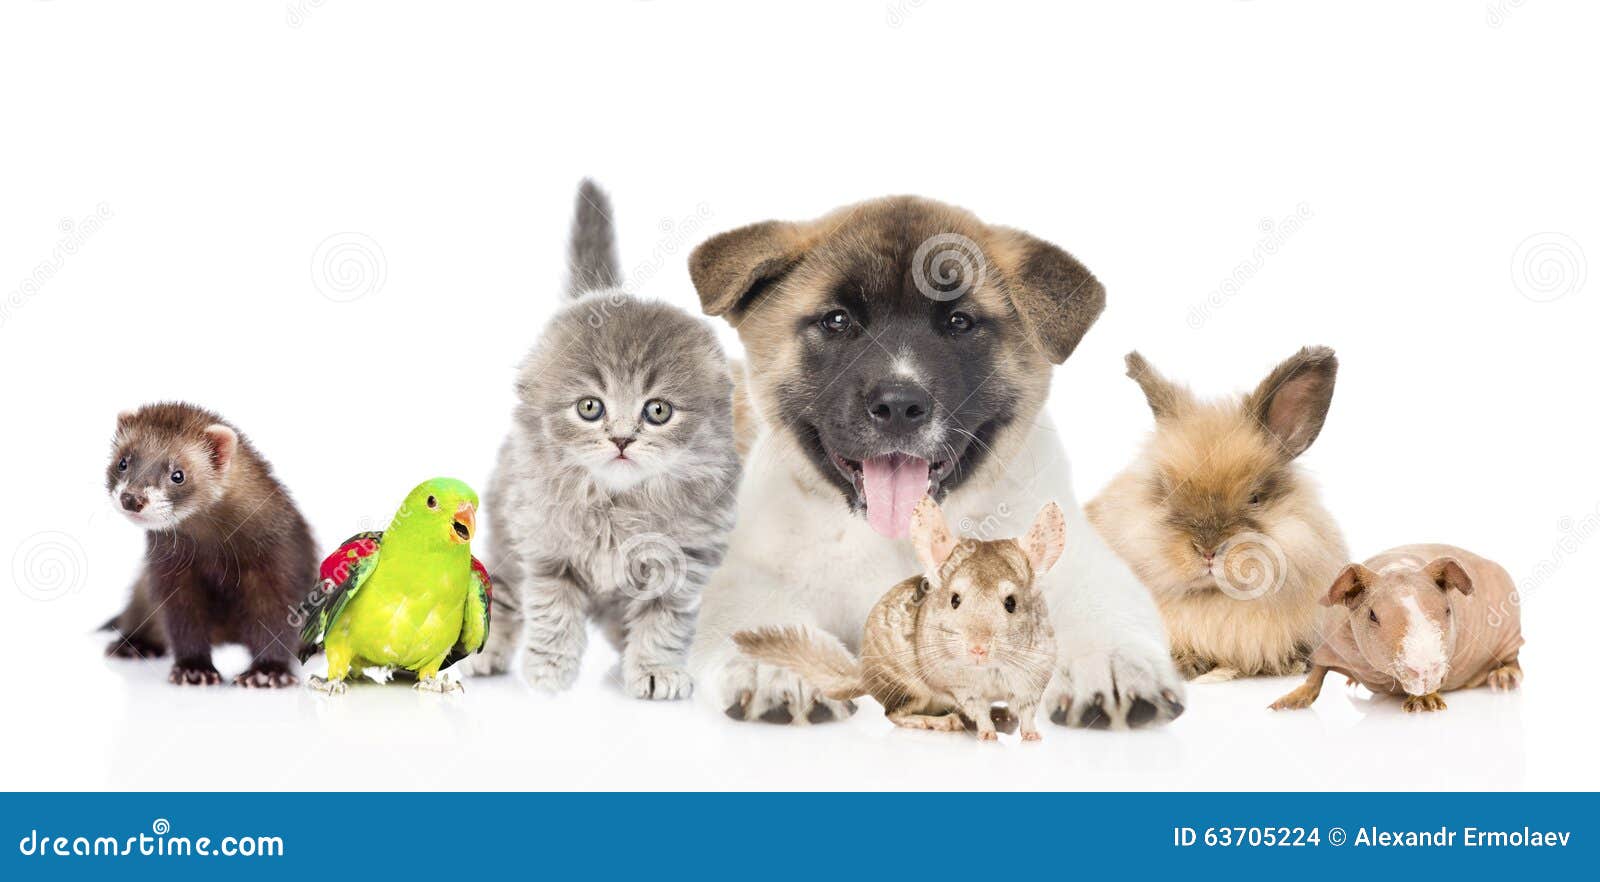 large-group-pets-together-front-isolated-white-background-63705224.jpg